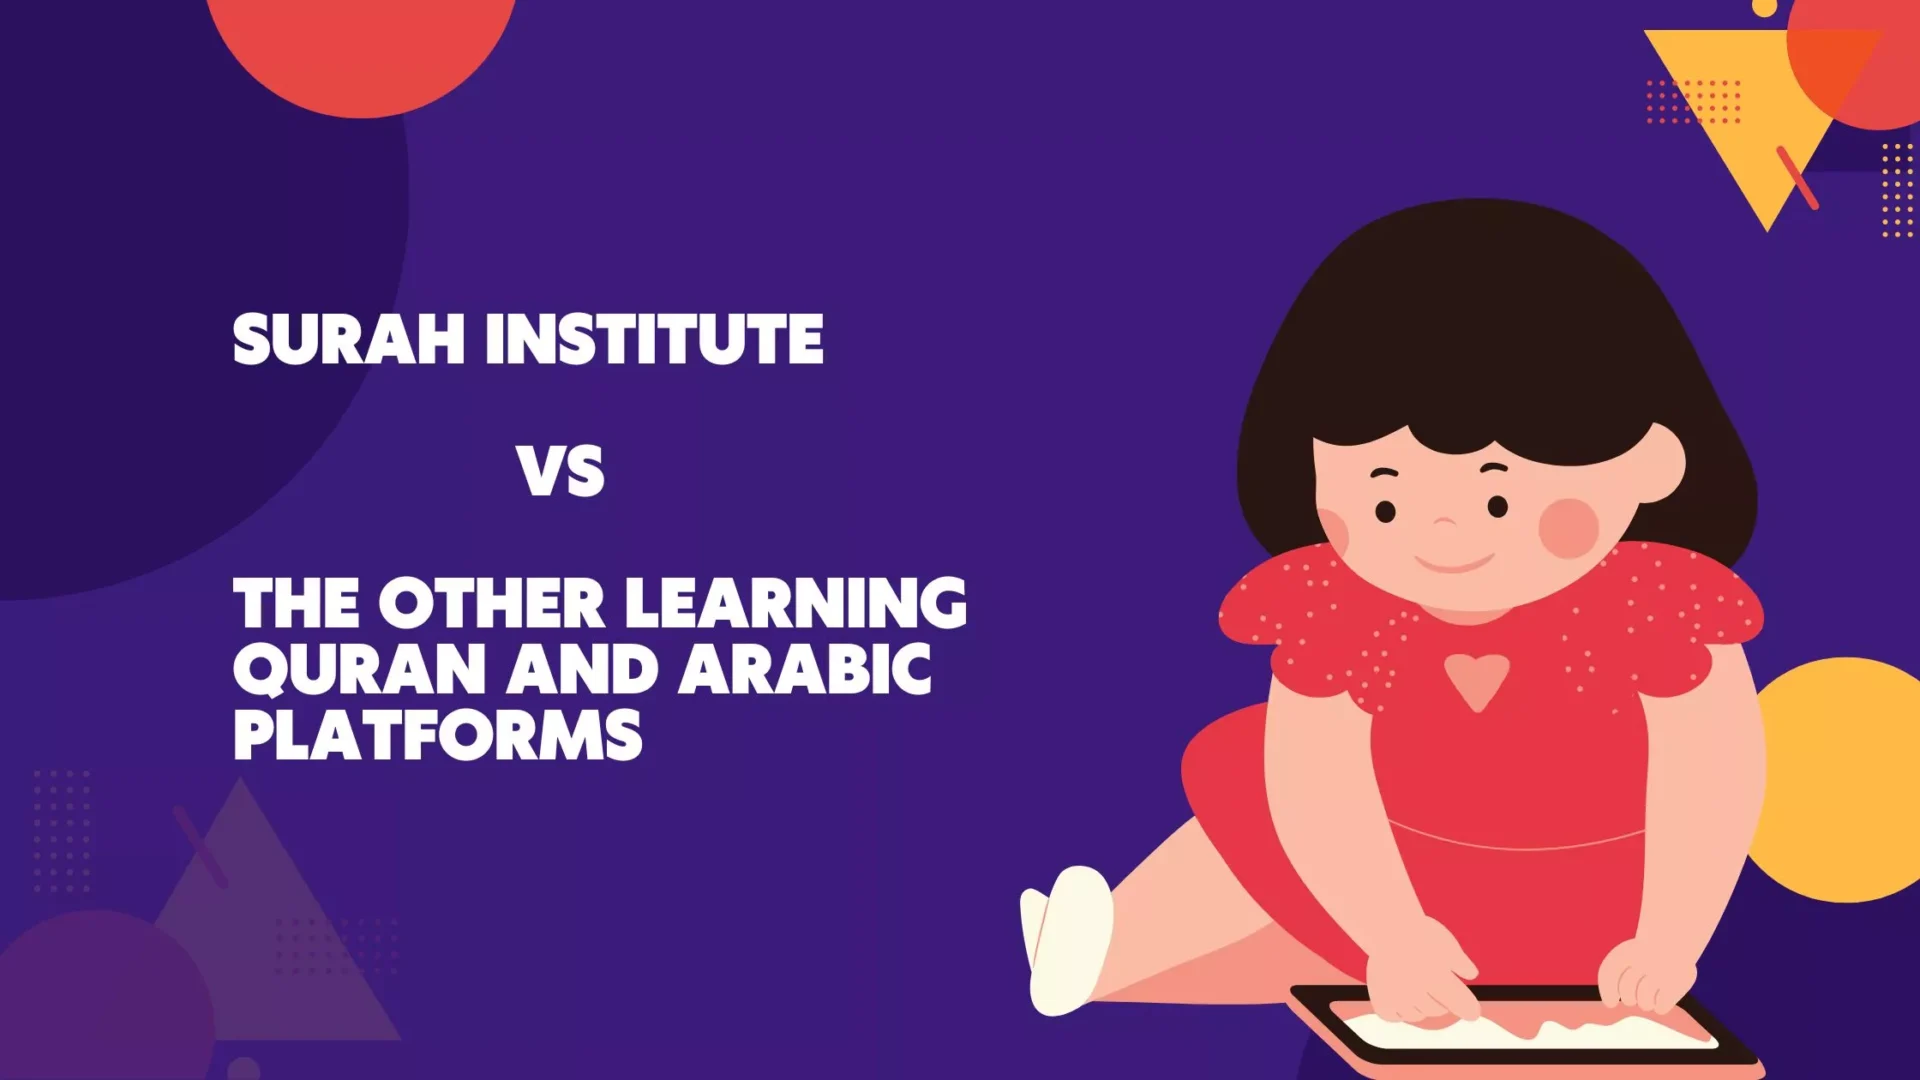 Surah Institute VS The Other Learning Quran And Arabic Platforms